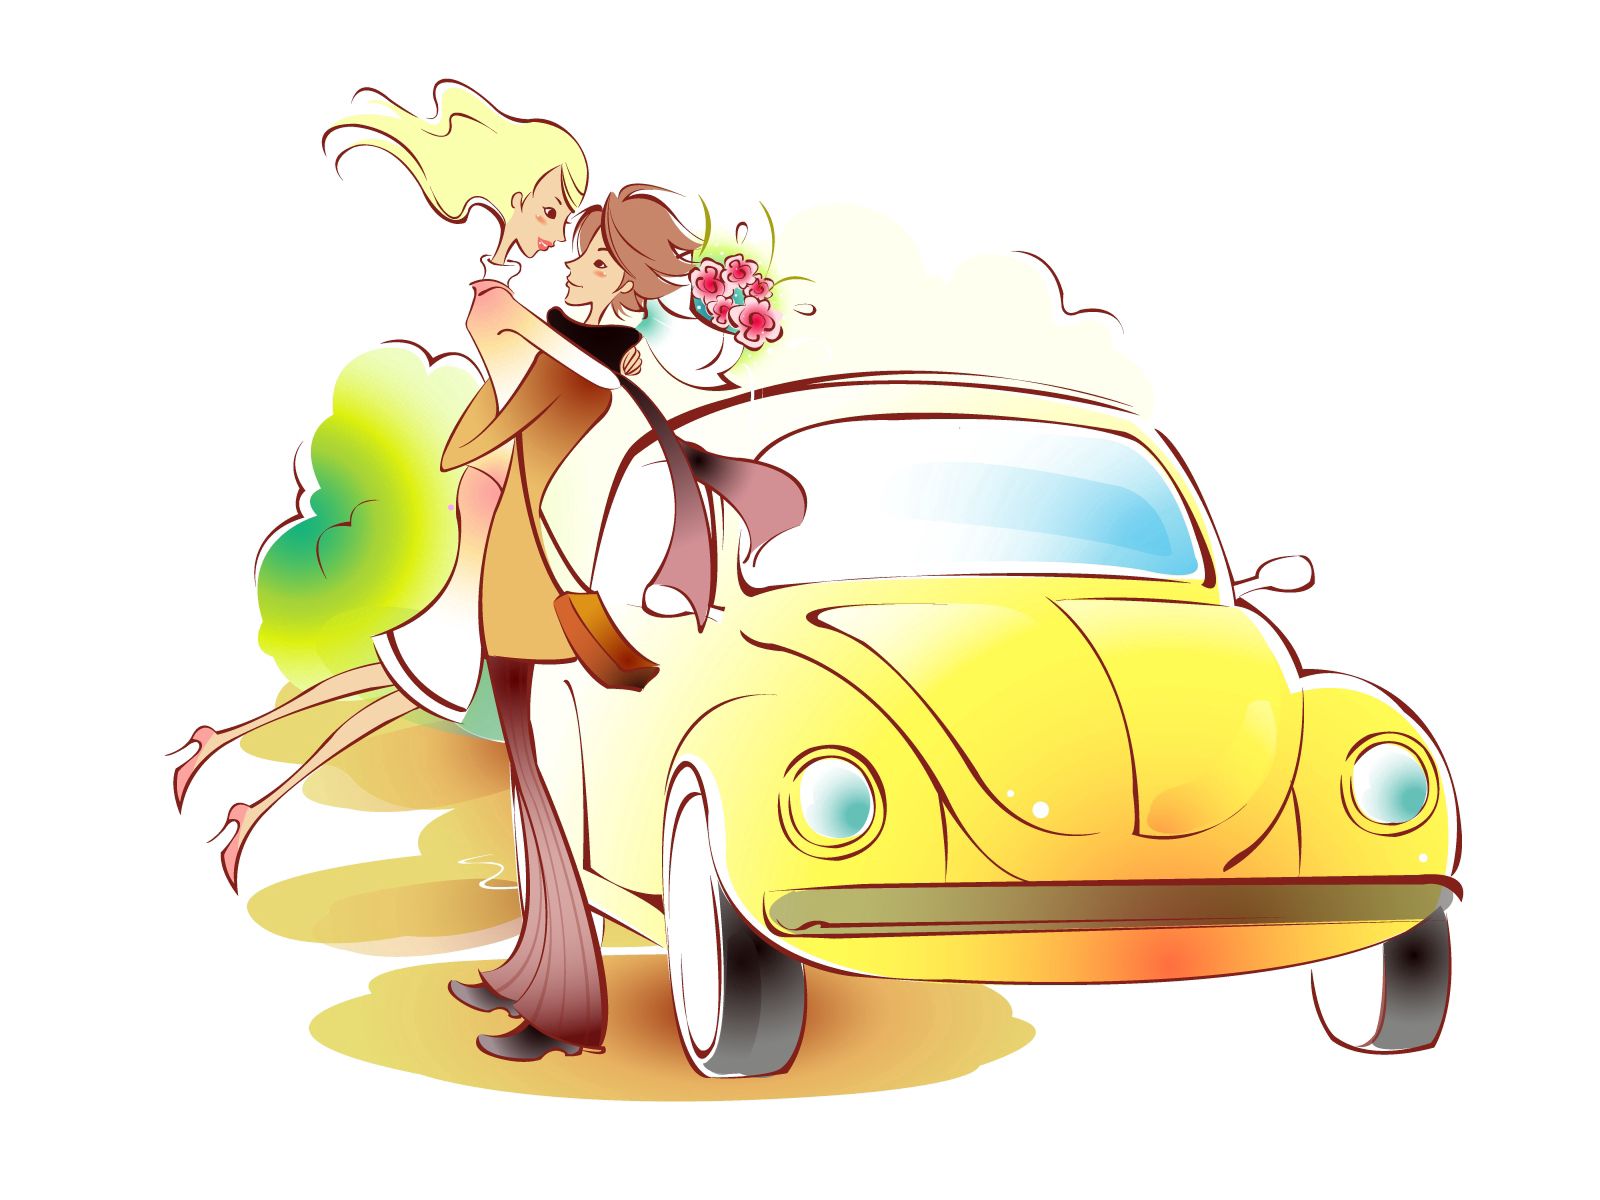 art, flowers, love, couple, pair, car, picture, drawing, embrace, meeting